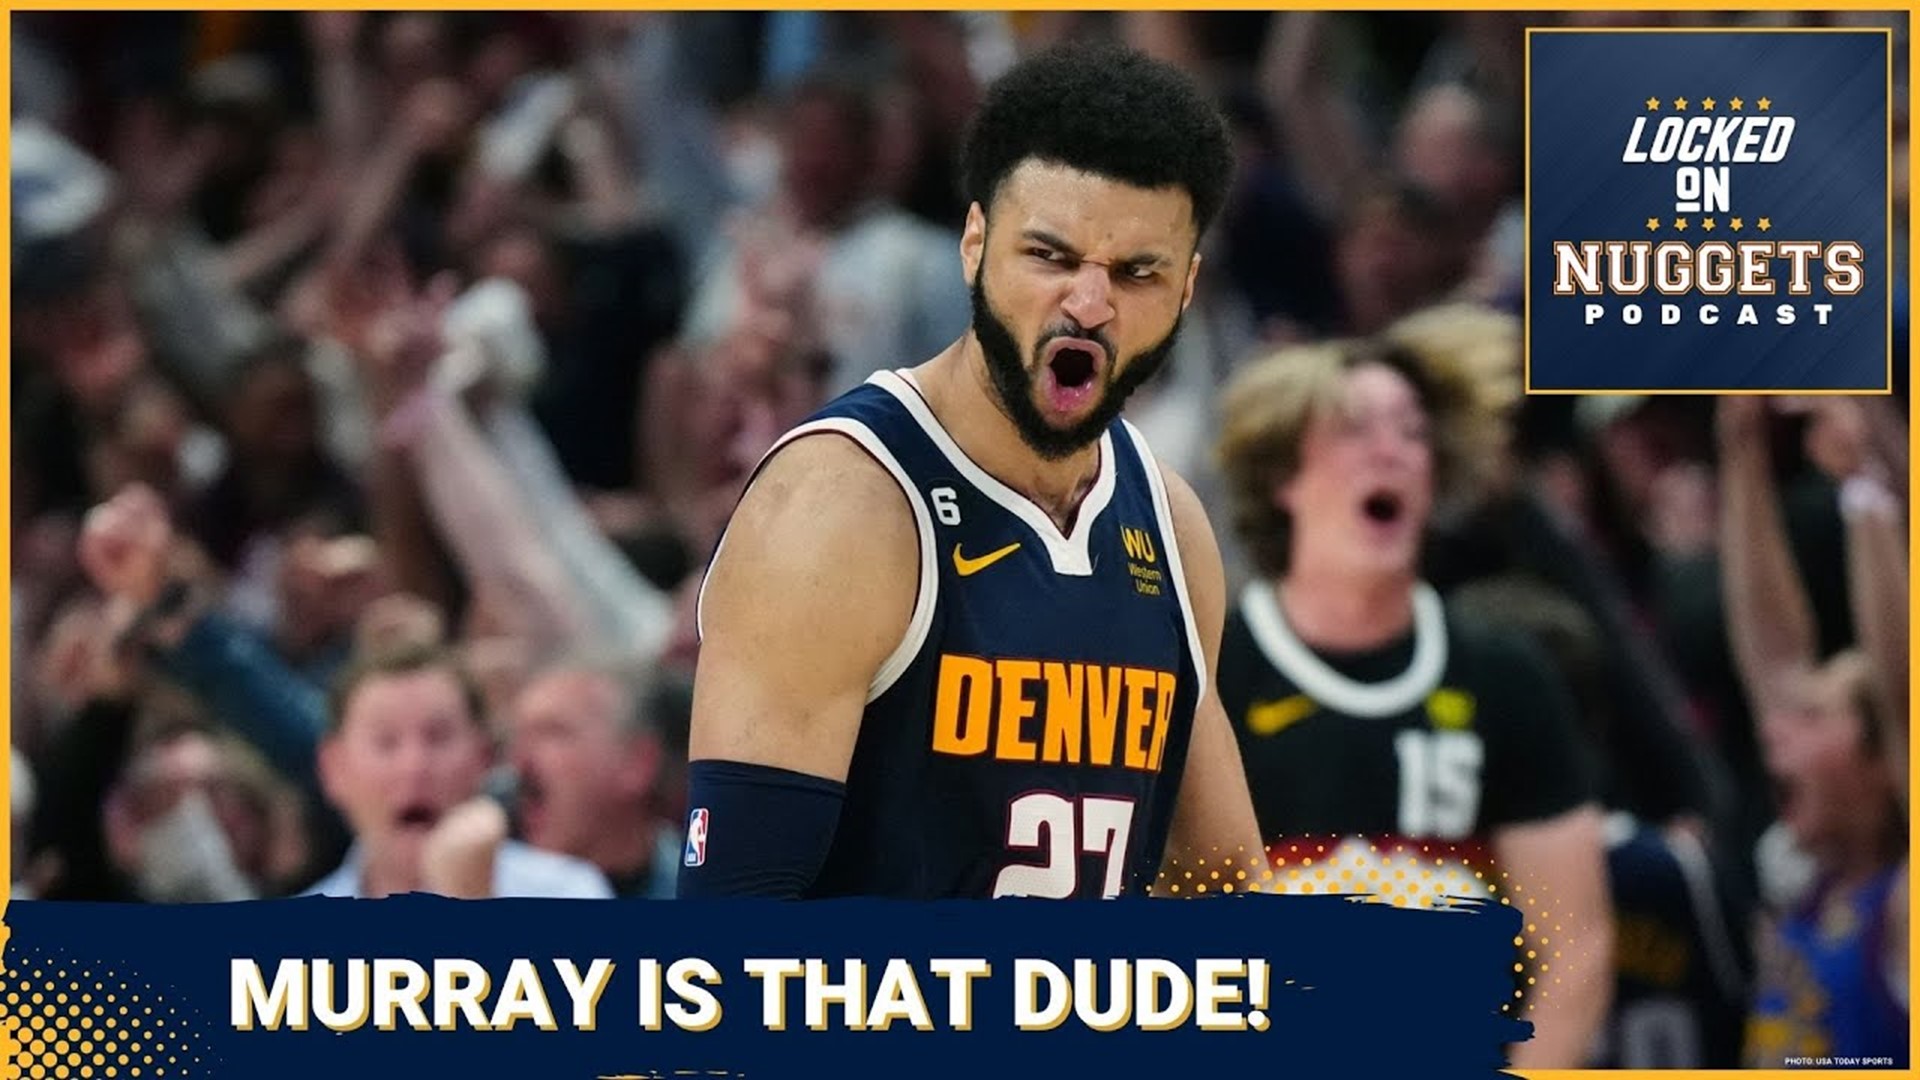 In a grueling, exhausting game, Jamal Murray had more in the tank. After a bad game, Murray detonates for 23 in the 4th to lead the Nuggets to the win and a 2-0 lead